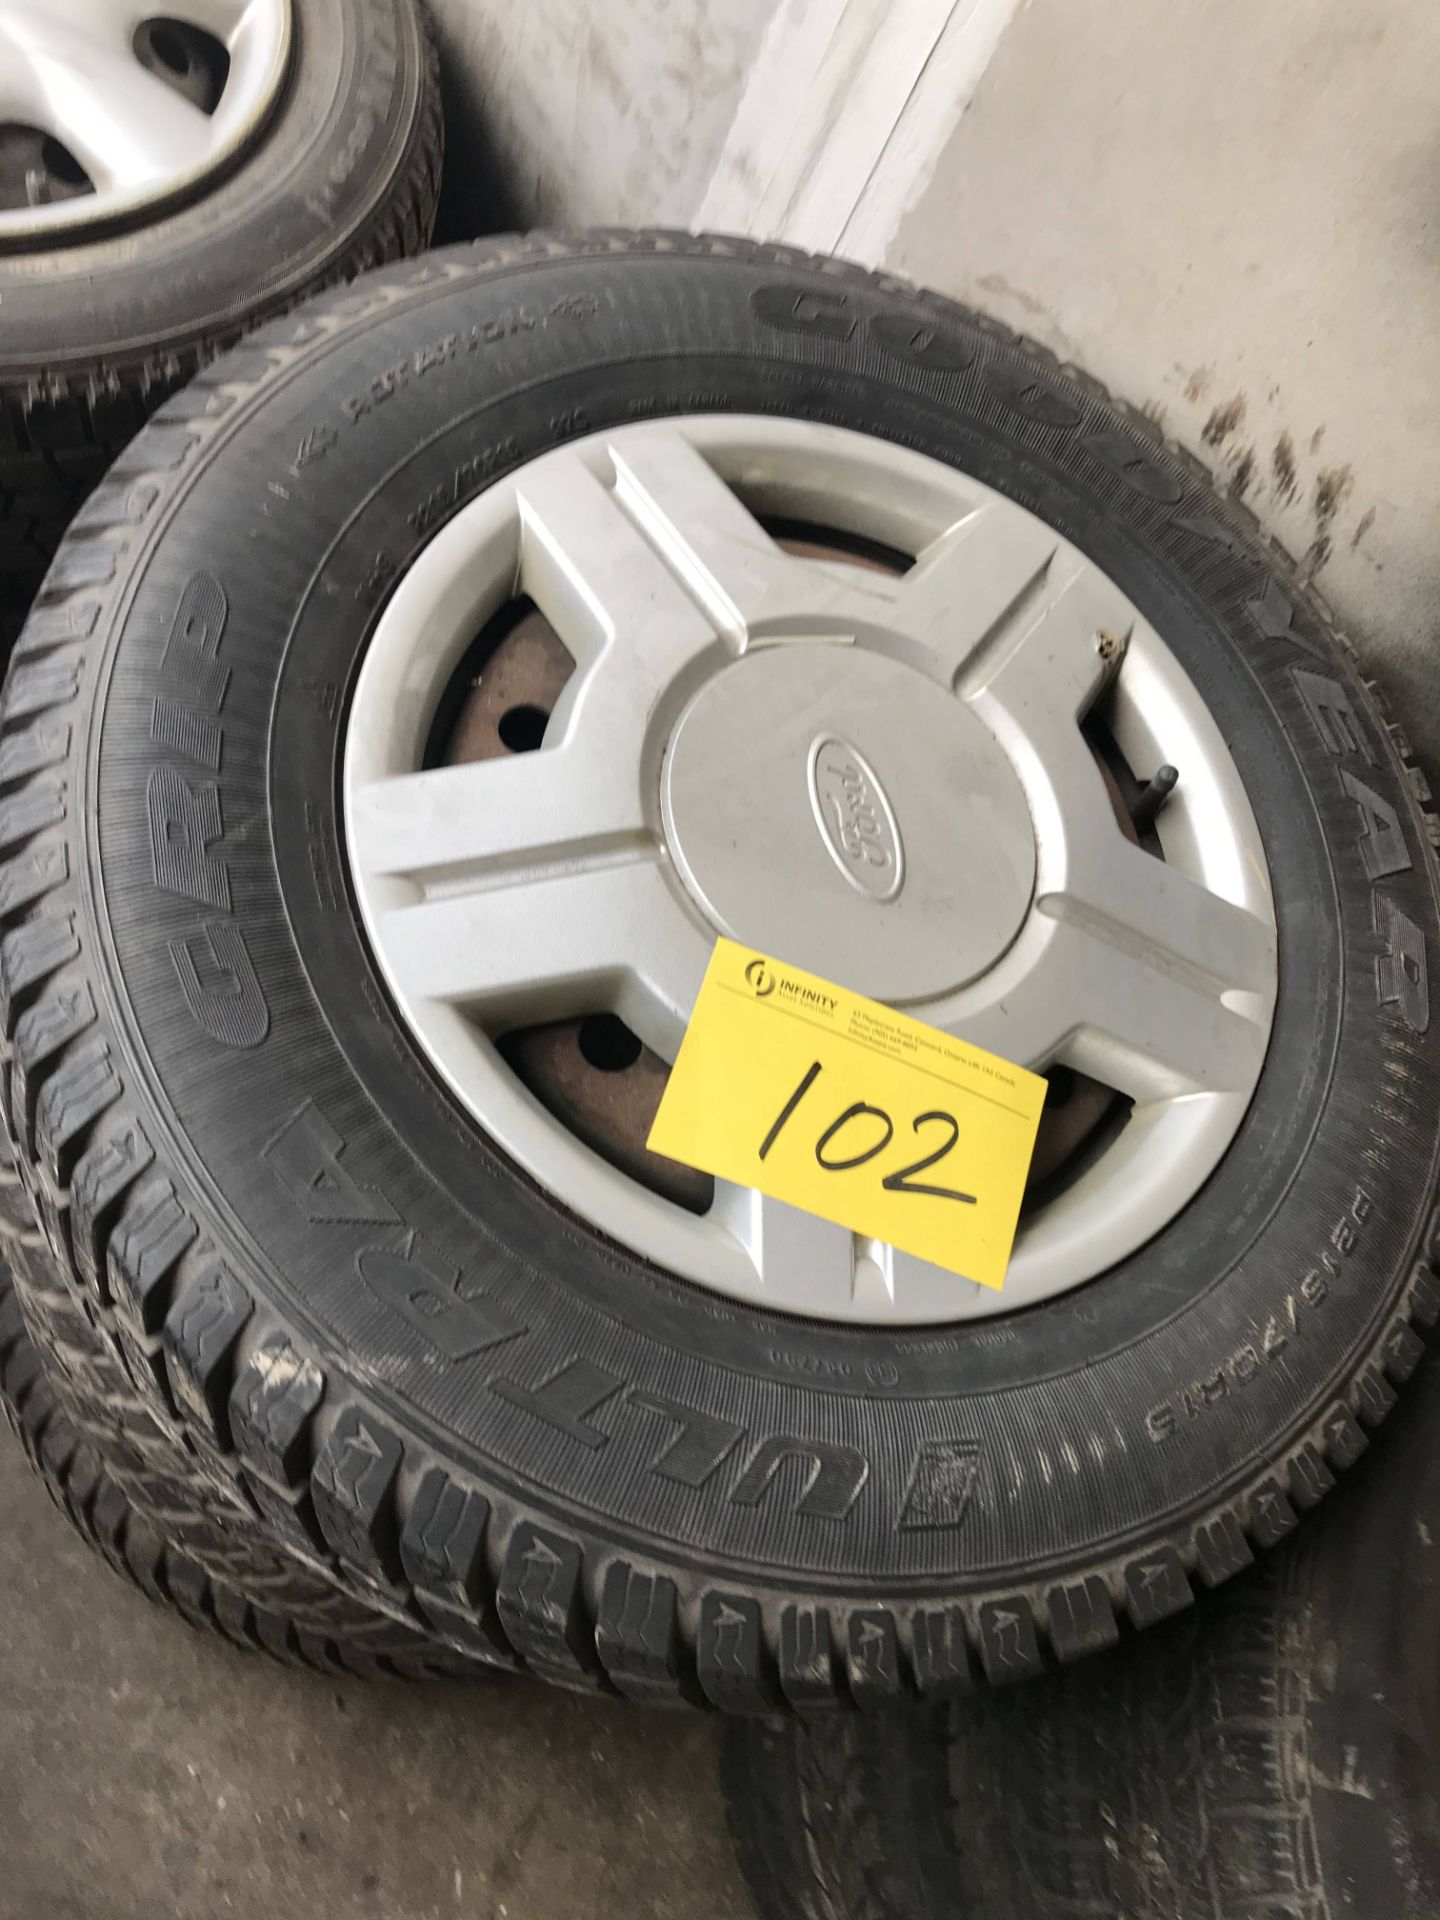 LOT (4) GOODYEAR ULTRA GRIP TIRES, P215/70R15 WINTER - Image 4 of 4